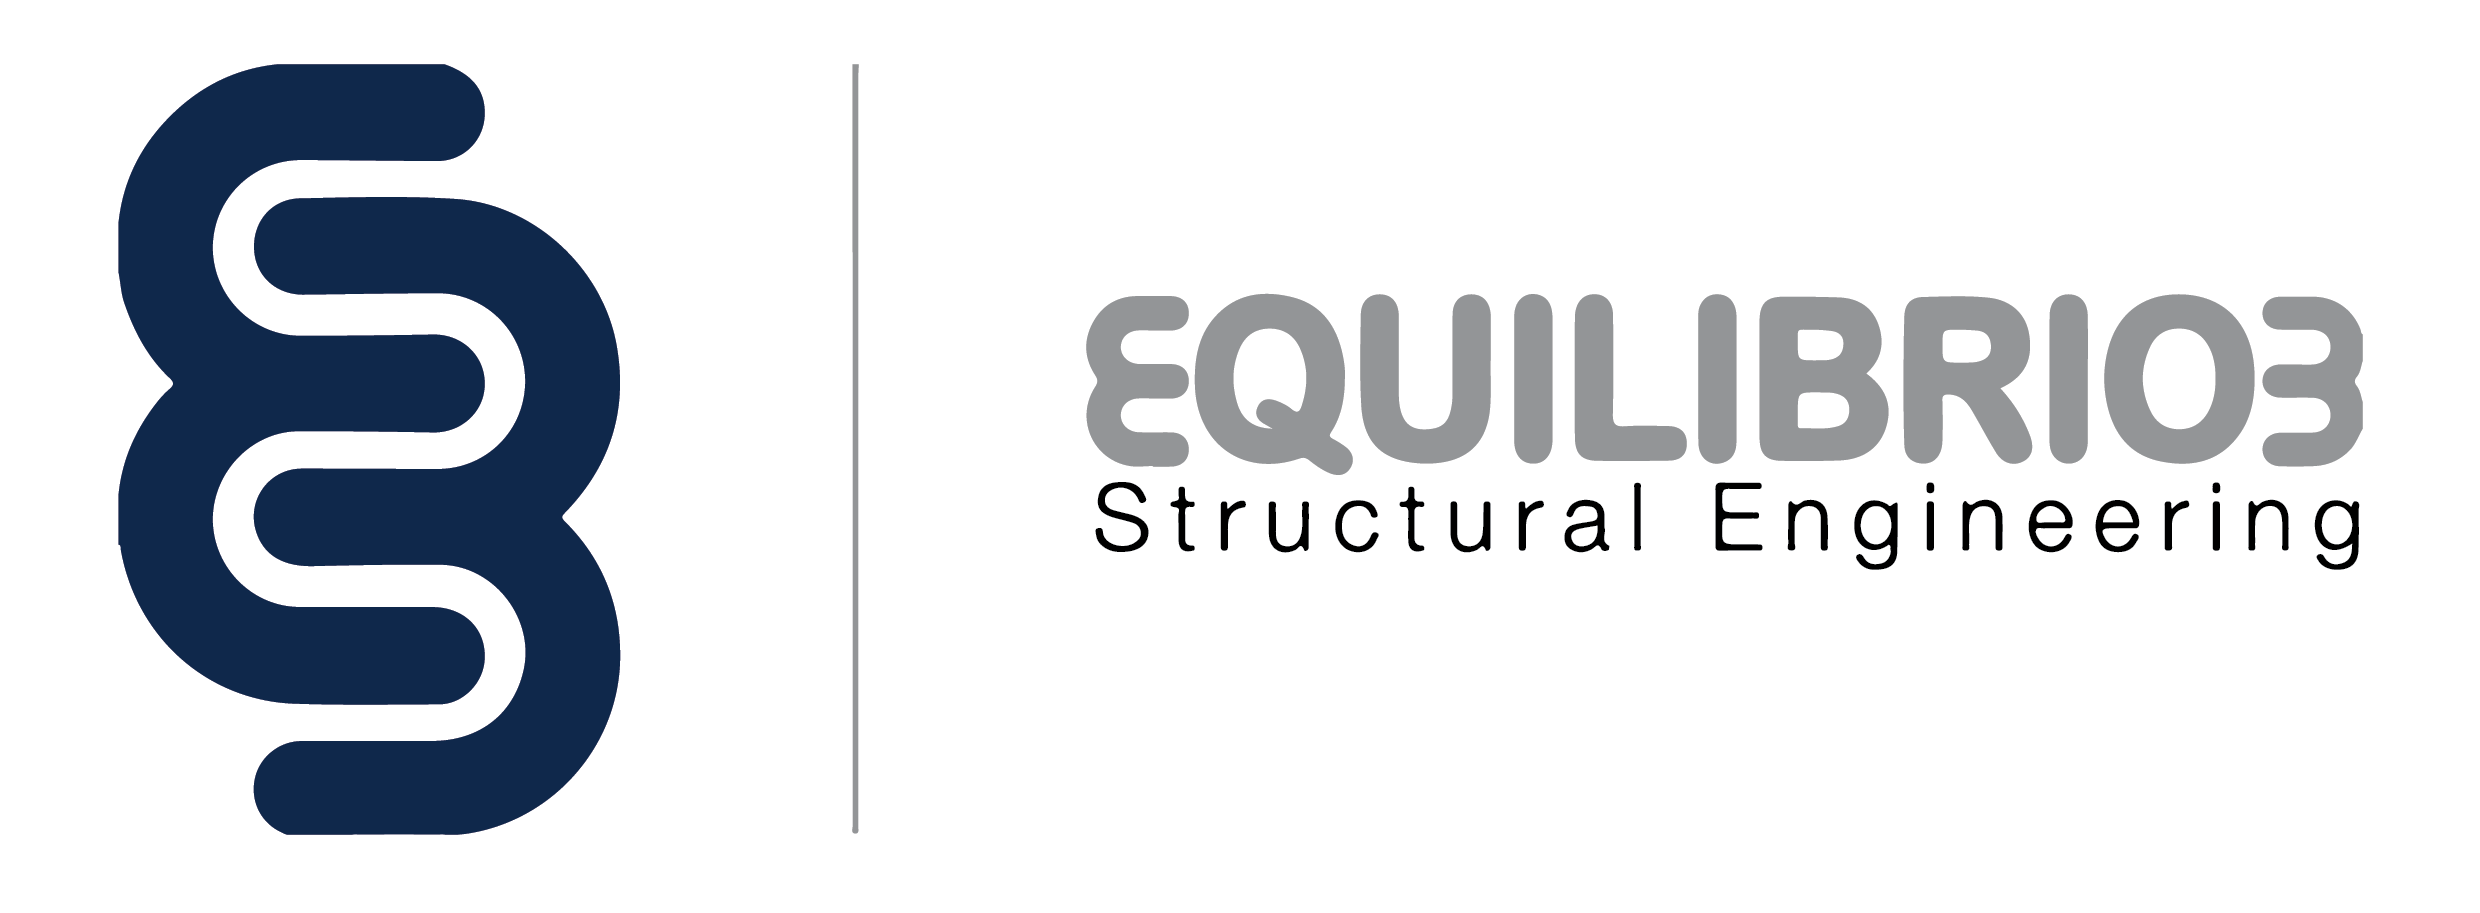 Equilibrio3 Structural Engineering